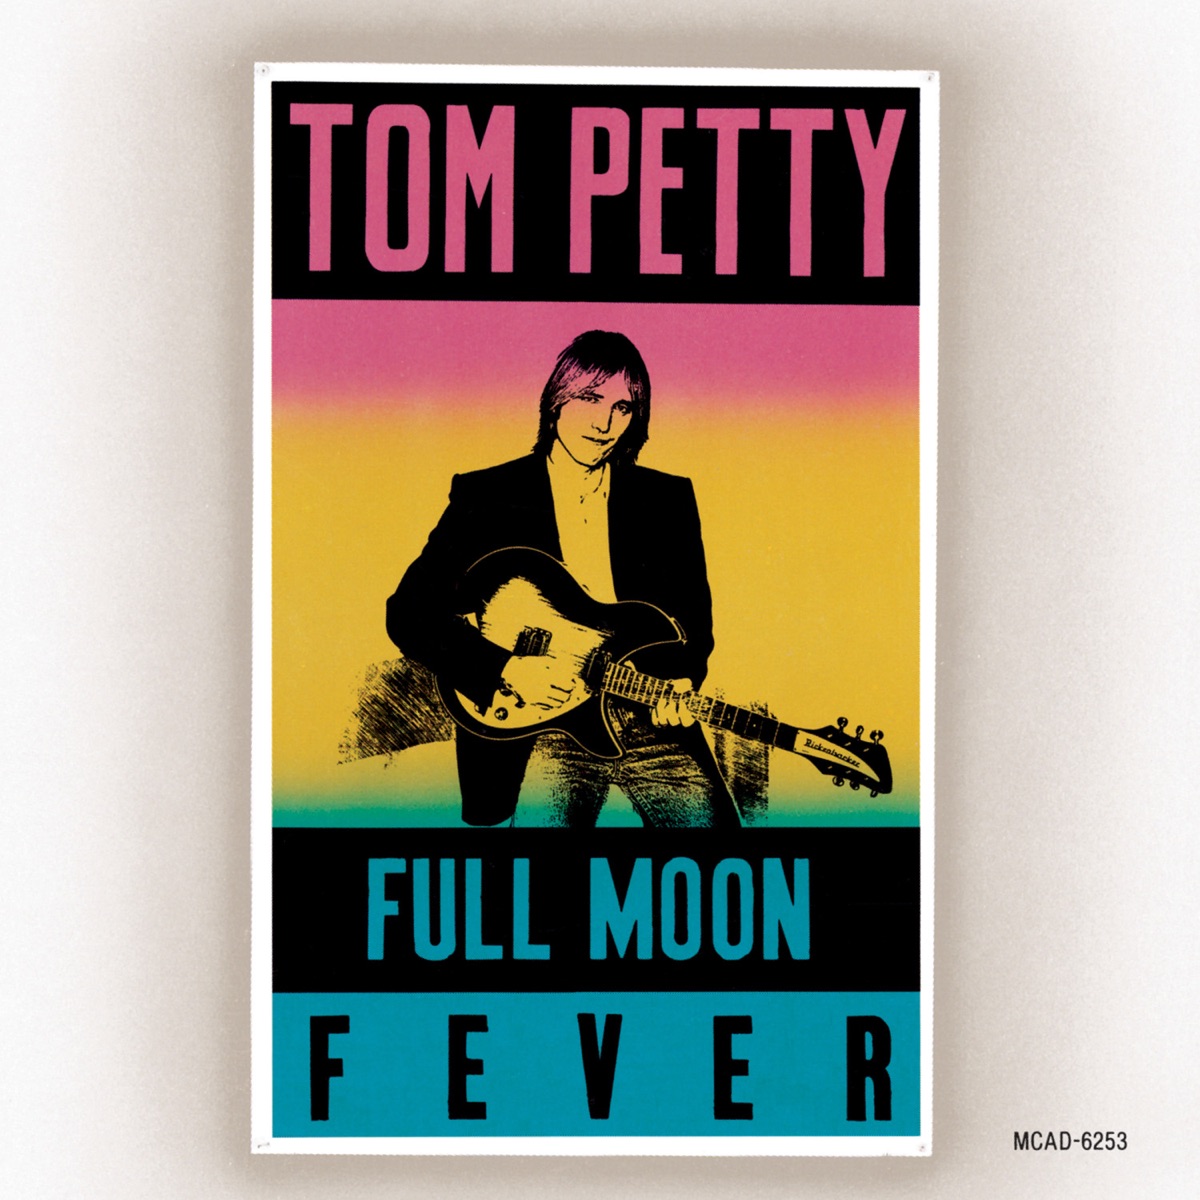 35 years ago today, @tompetty released “Full Moon Fever.” The only thing this instant classic was missing was #BooWilbury.